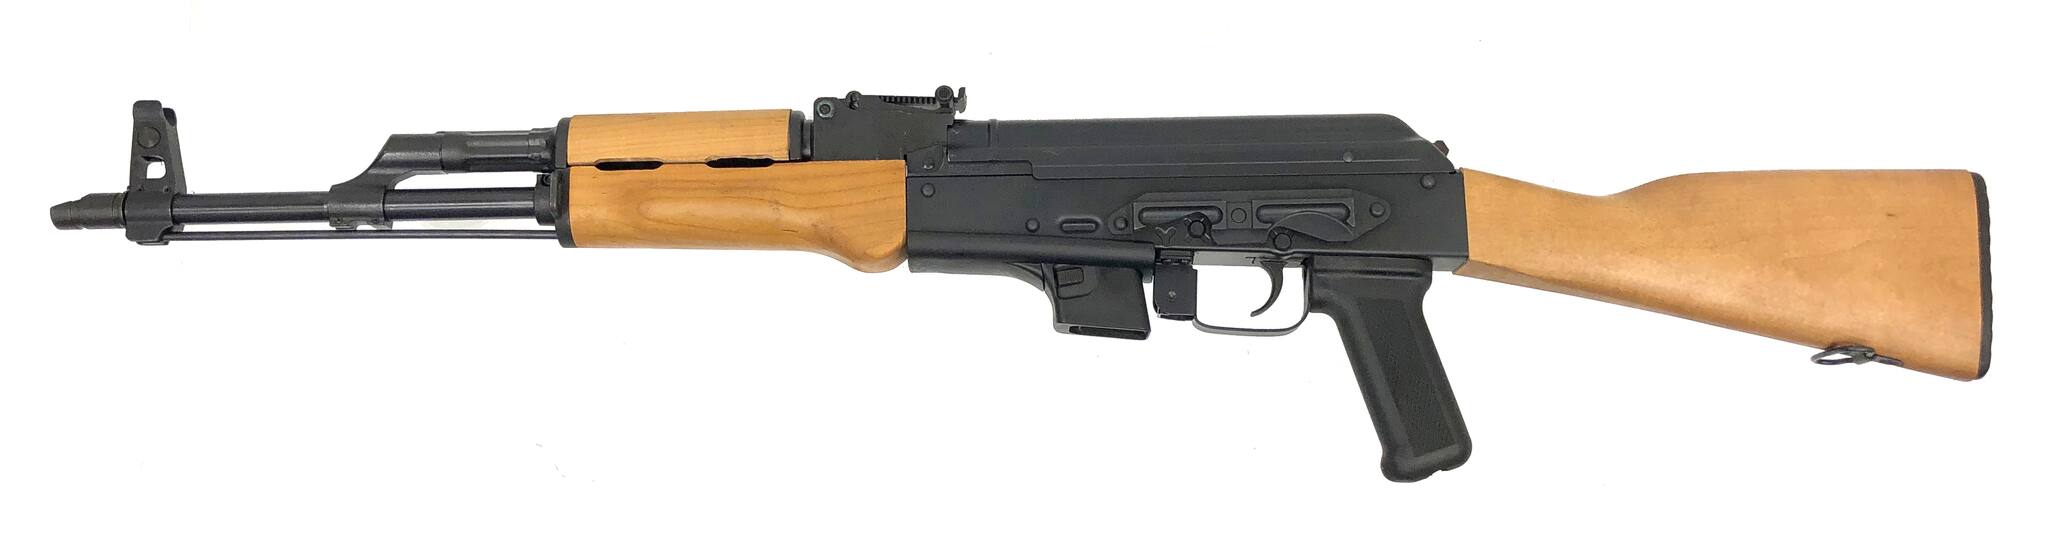 Image of CENTURY ARMS WASR-M - RI3765-N